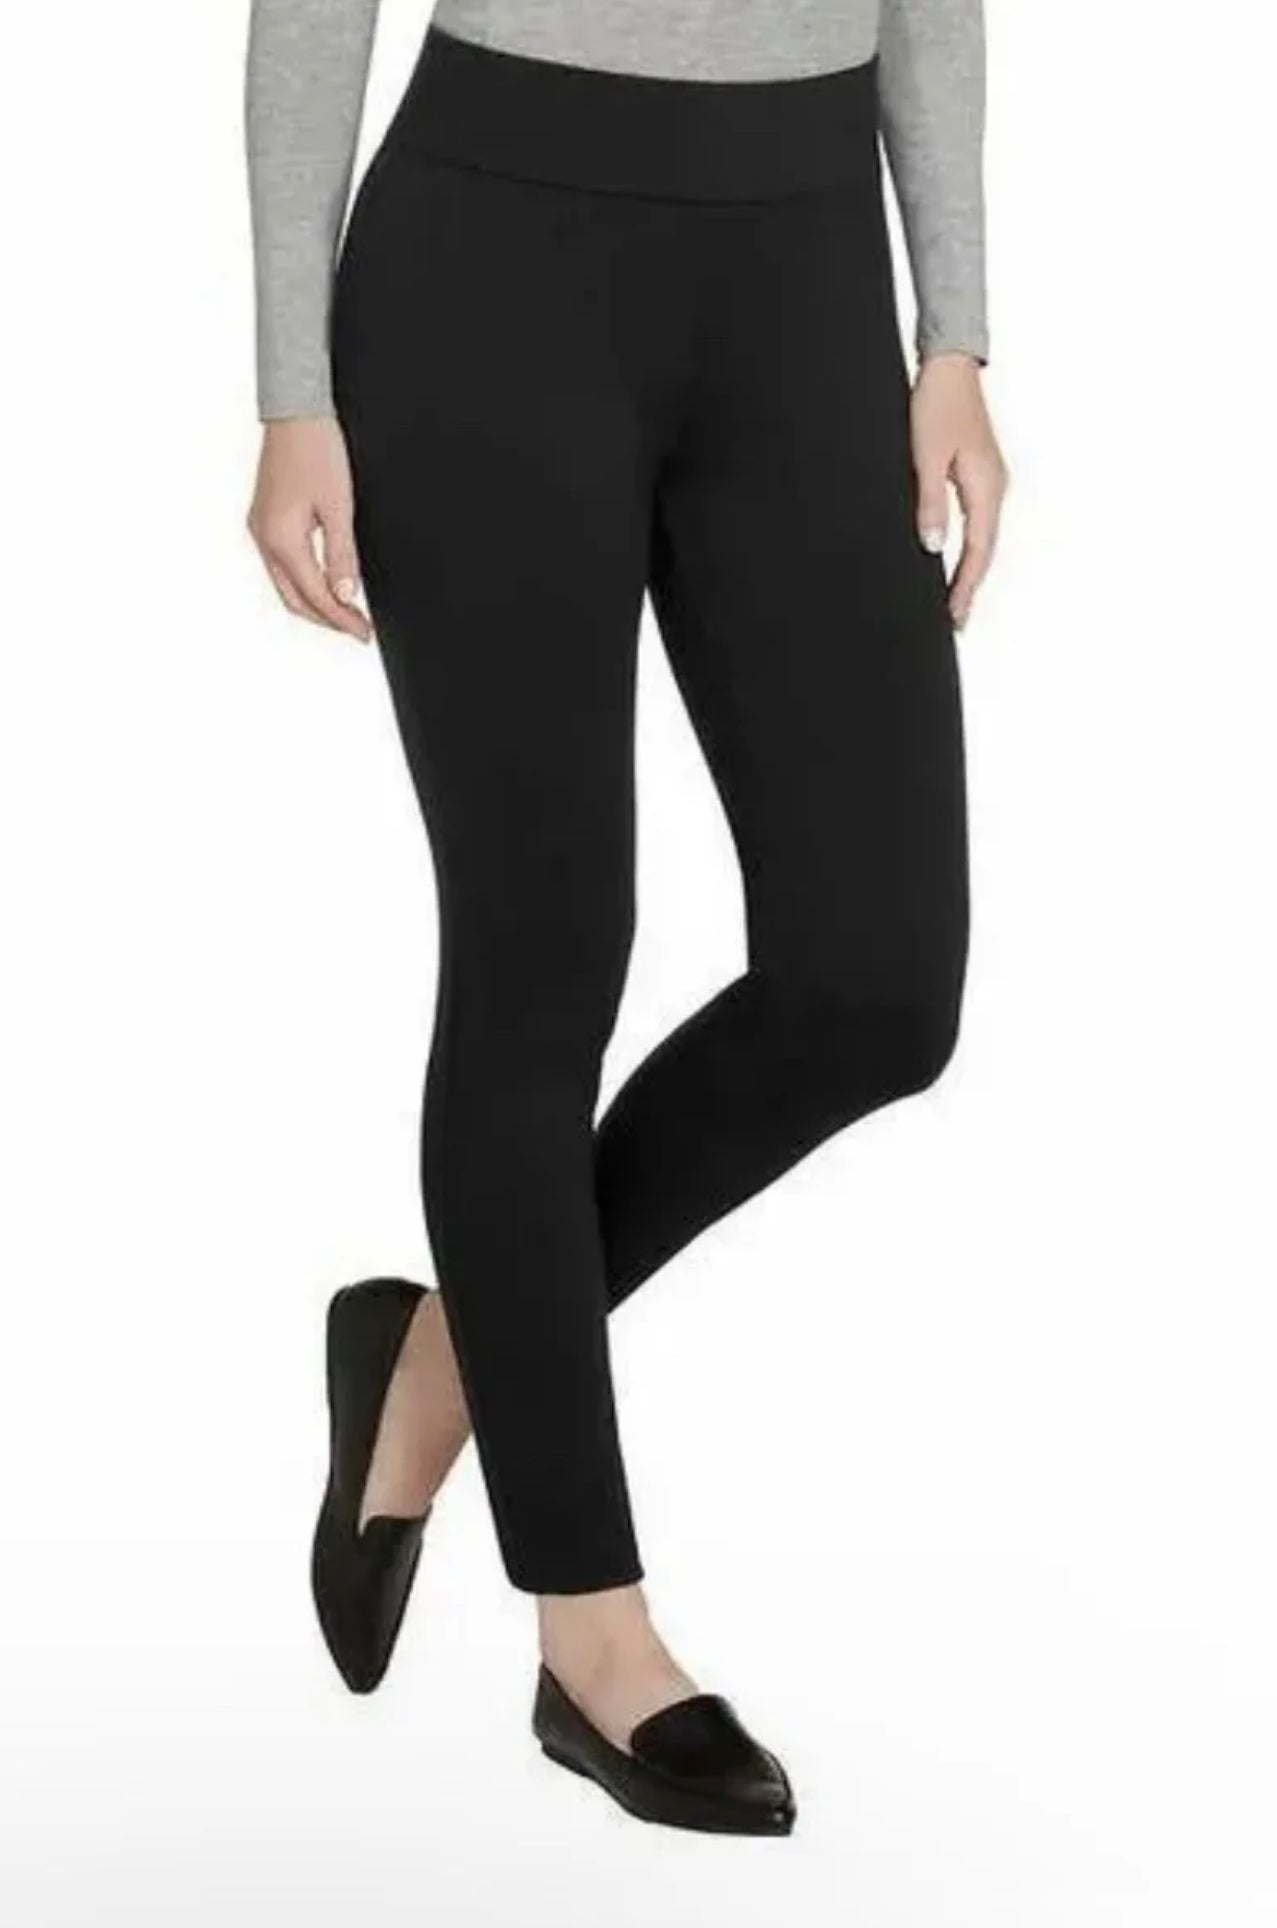 Mid Waist M Grey Ankle Length Leggings, Party Wear, Slim Fit at Rs